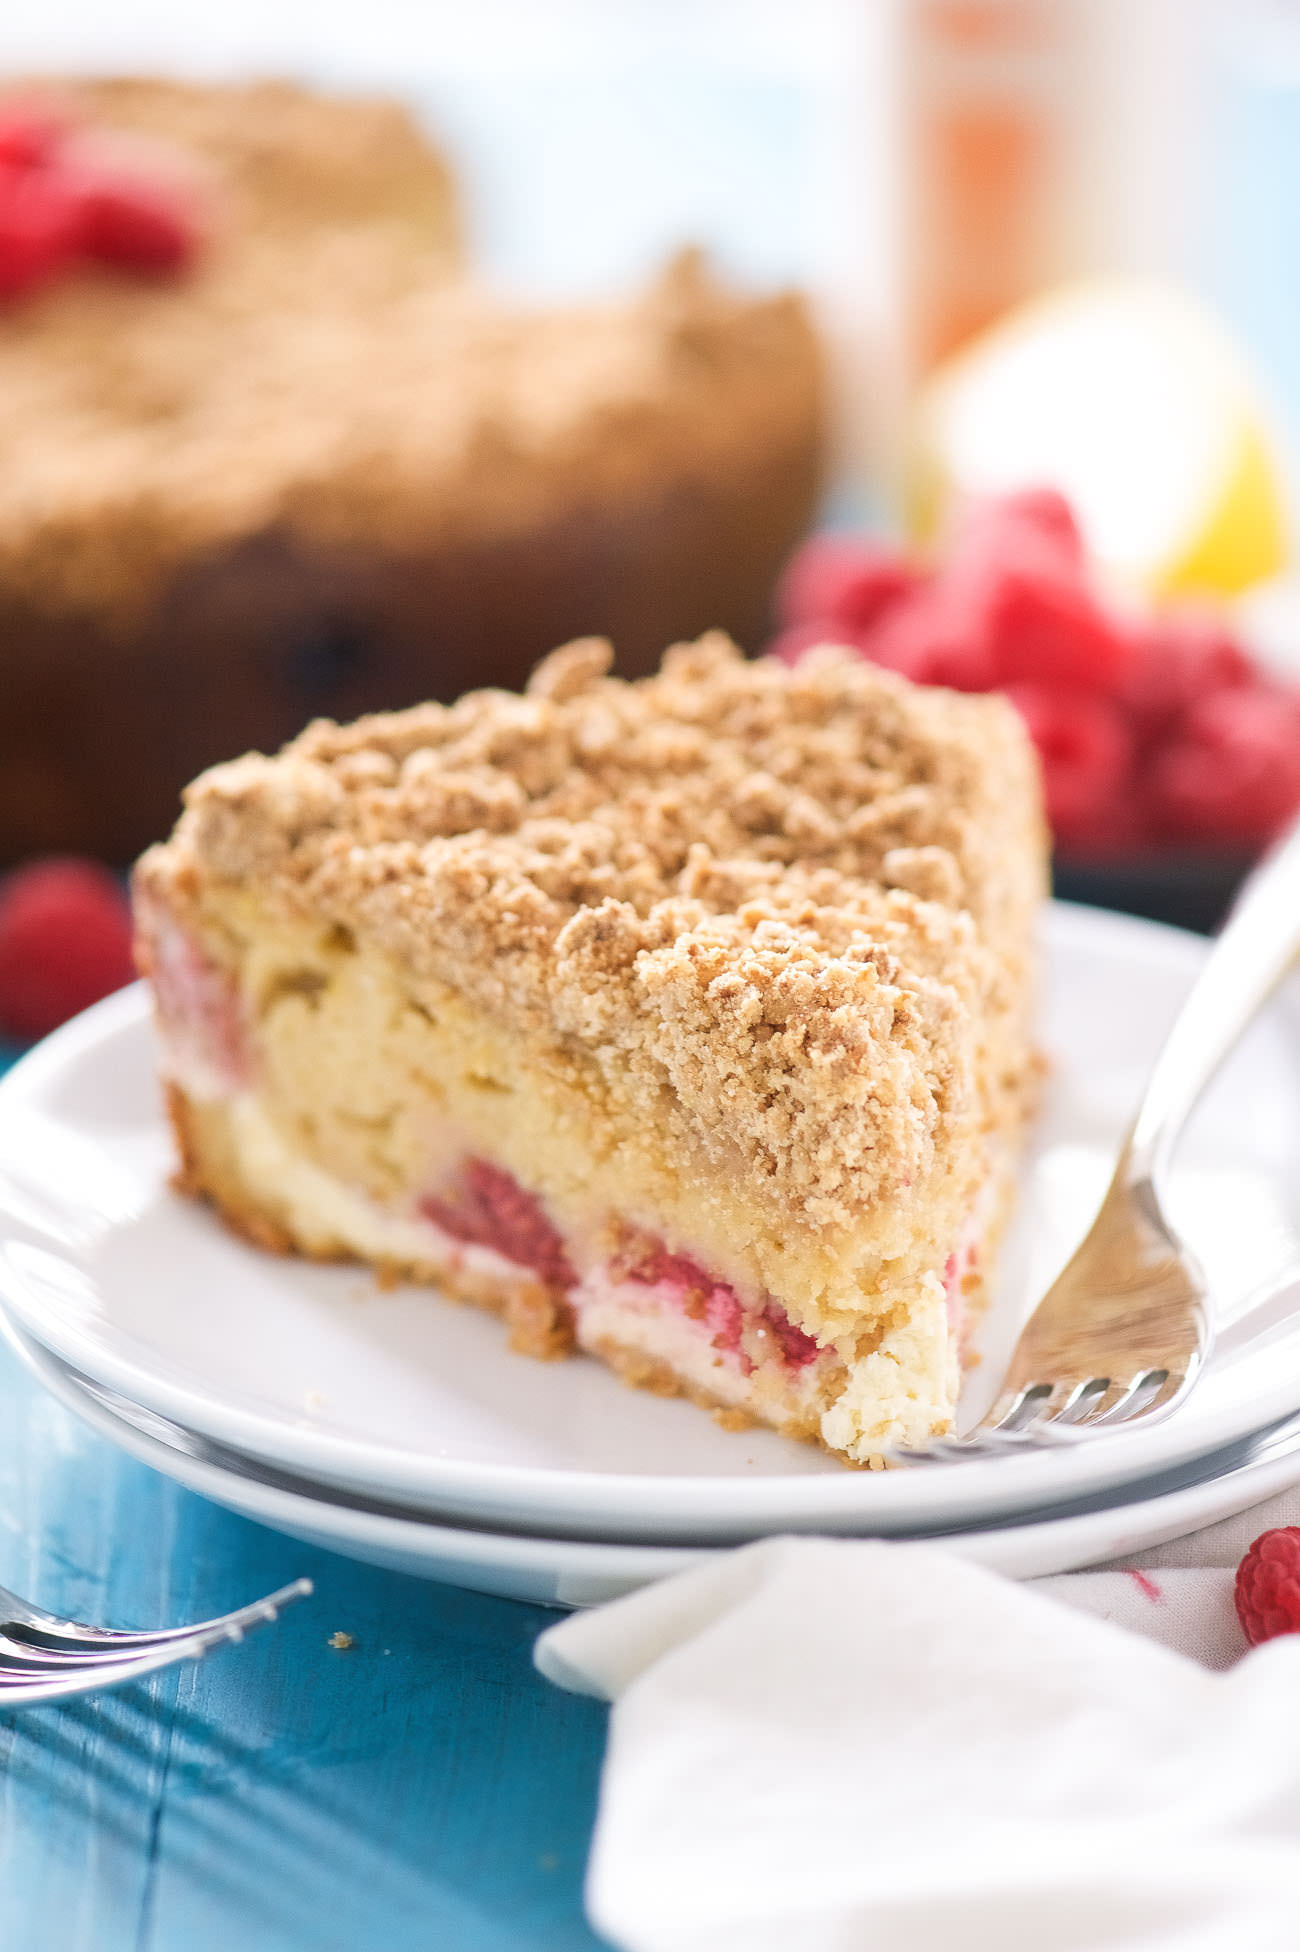 This Lemon Berry Cream Cheese Coffee Cake is the answer to your brunch prayers! A lightened up coffee cake that is bursting with spring flavors, filled with a creamy cream cheese swirl and a thick crumb layer!